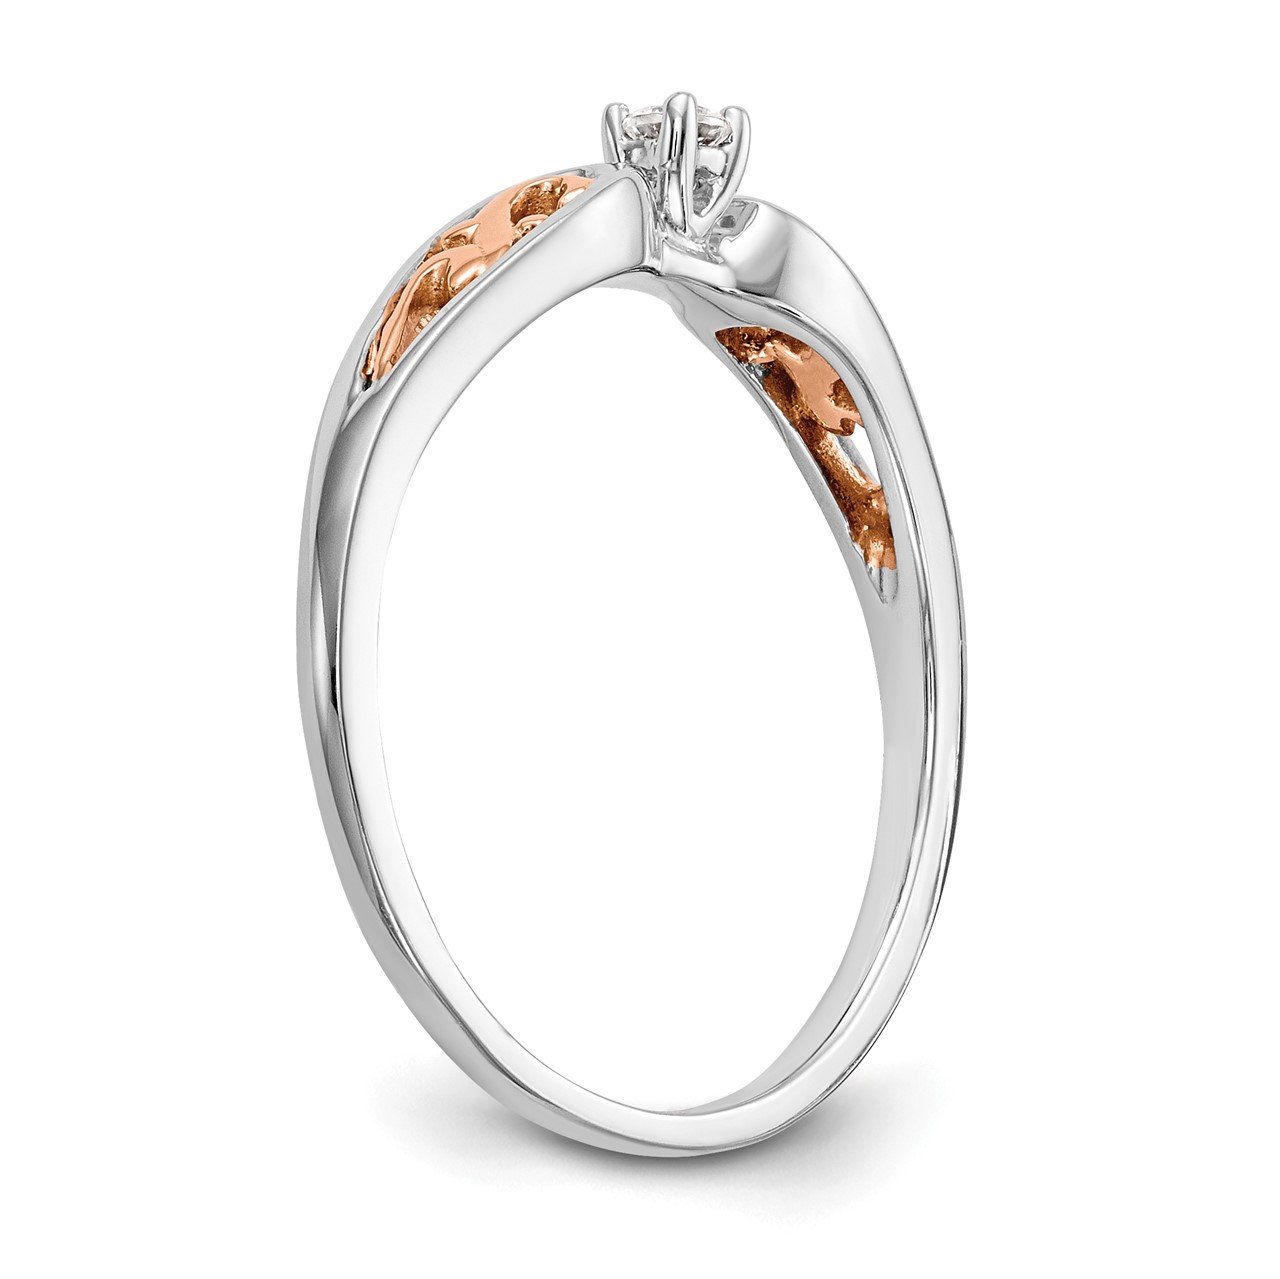 14K White Gold and Rose Gold Comp. Diamond Promise/Engagement Ring-5